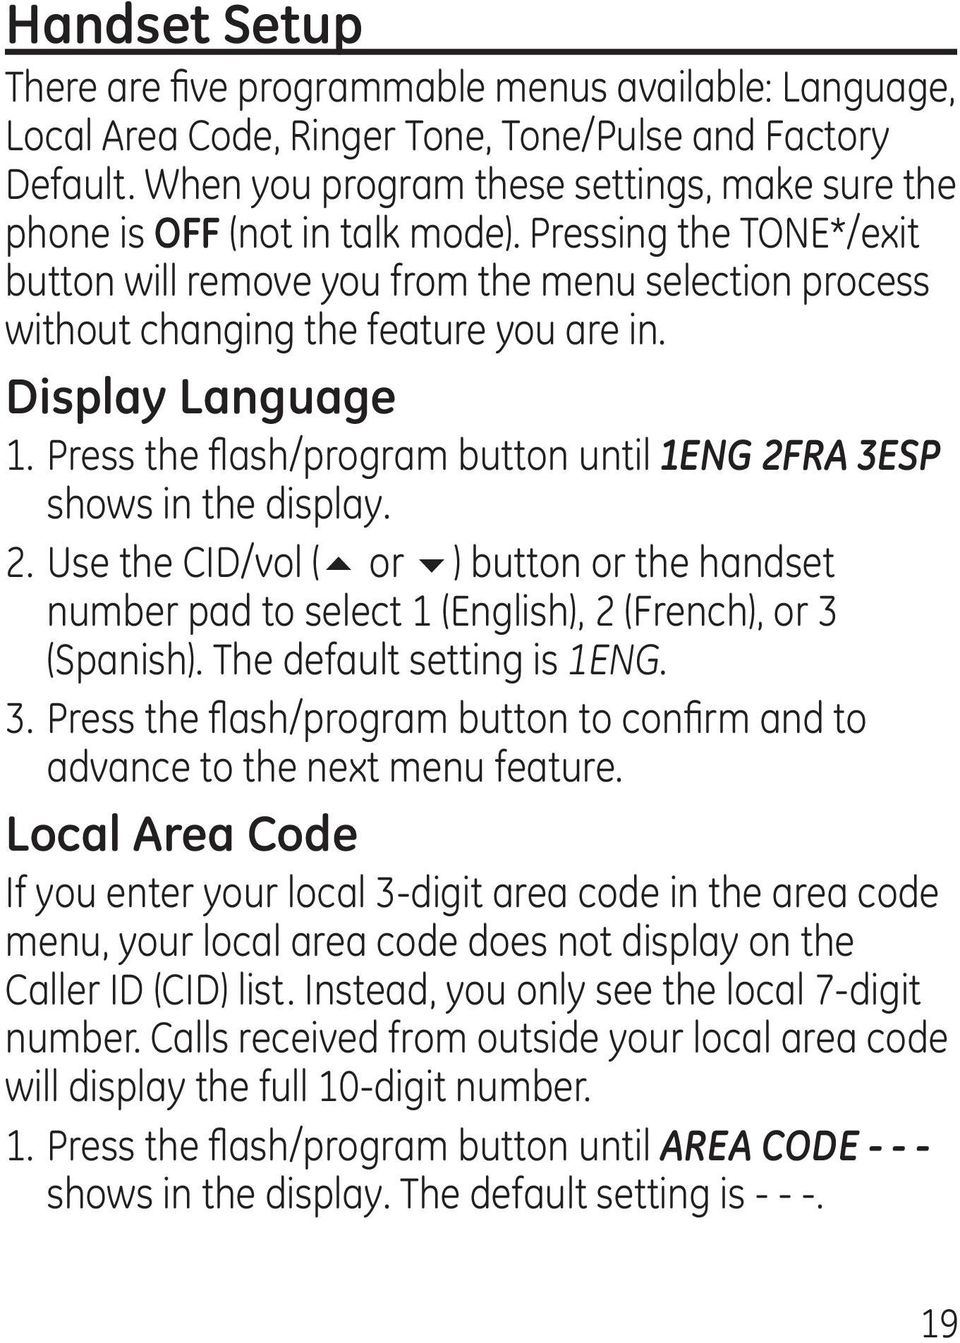 Display Language 1. Press the flash/program button until 1ENG 2FRA 3ESP shows in the display. 2. Use the CID/vol (5 or 6) button or the handset number pad to select 1 (English), 2 (French), or 3 (Spanish).